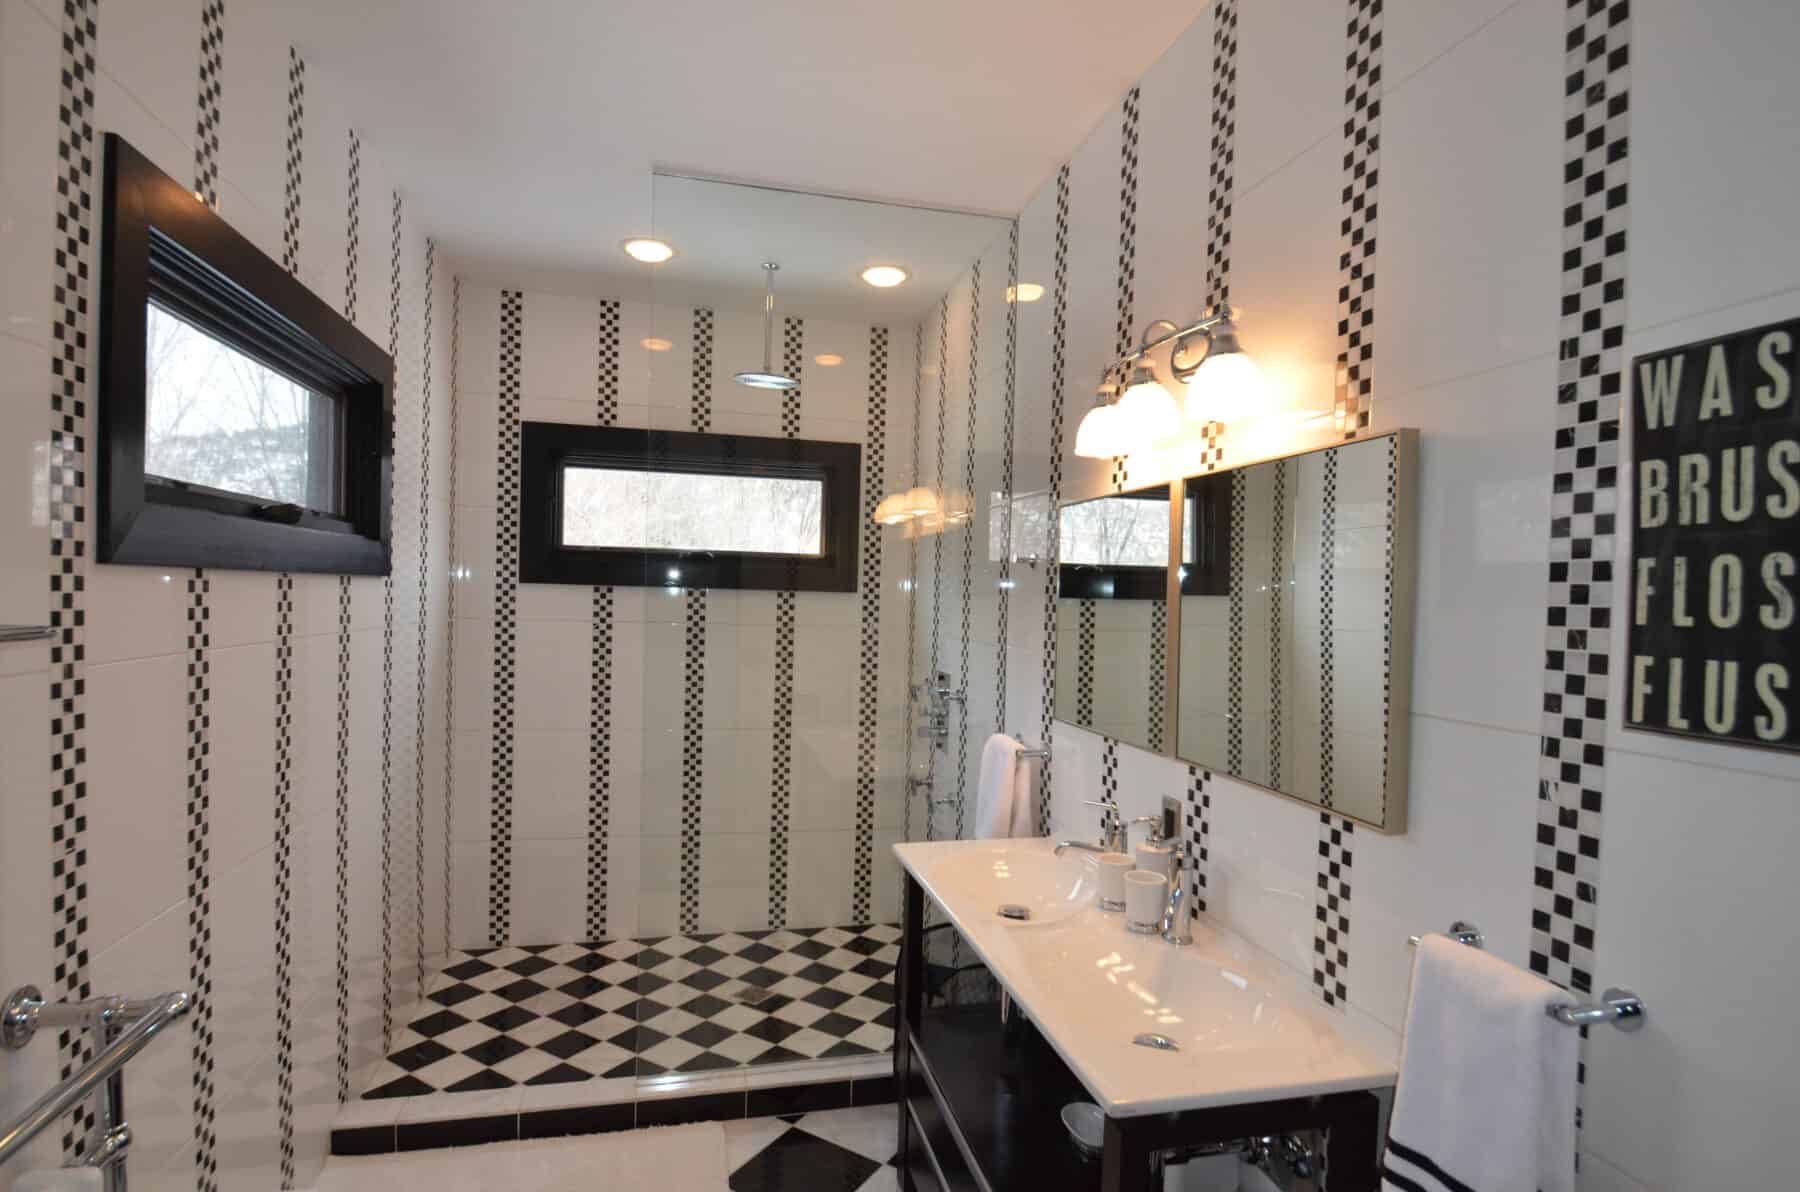 A Whimsical Checkerboard Harlequin Tiled Bathroom with a Modern Twist and Rain Shower in Aspen, Colorado Custom Home. Luxury Home Building Interiors